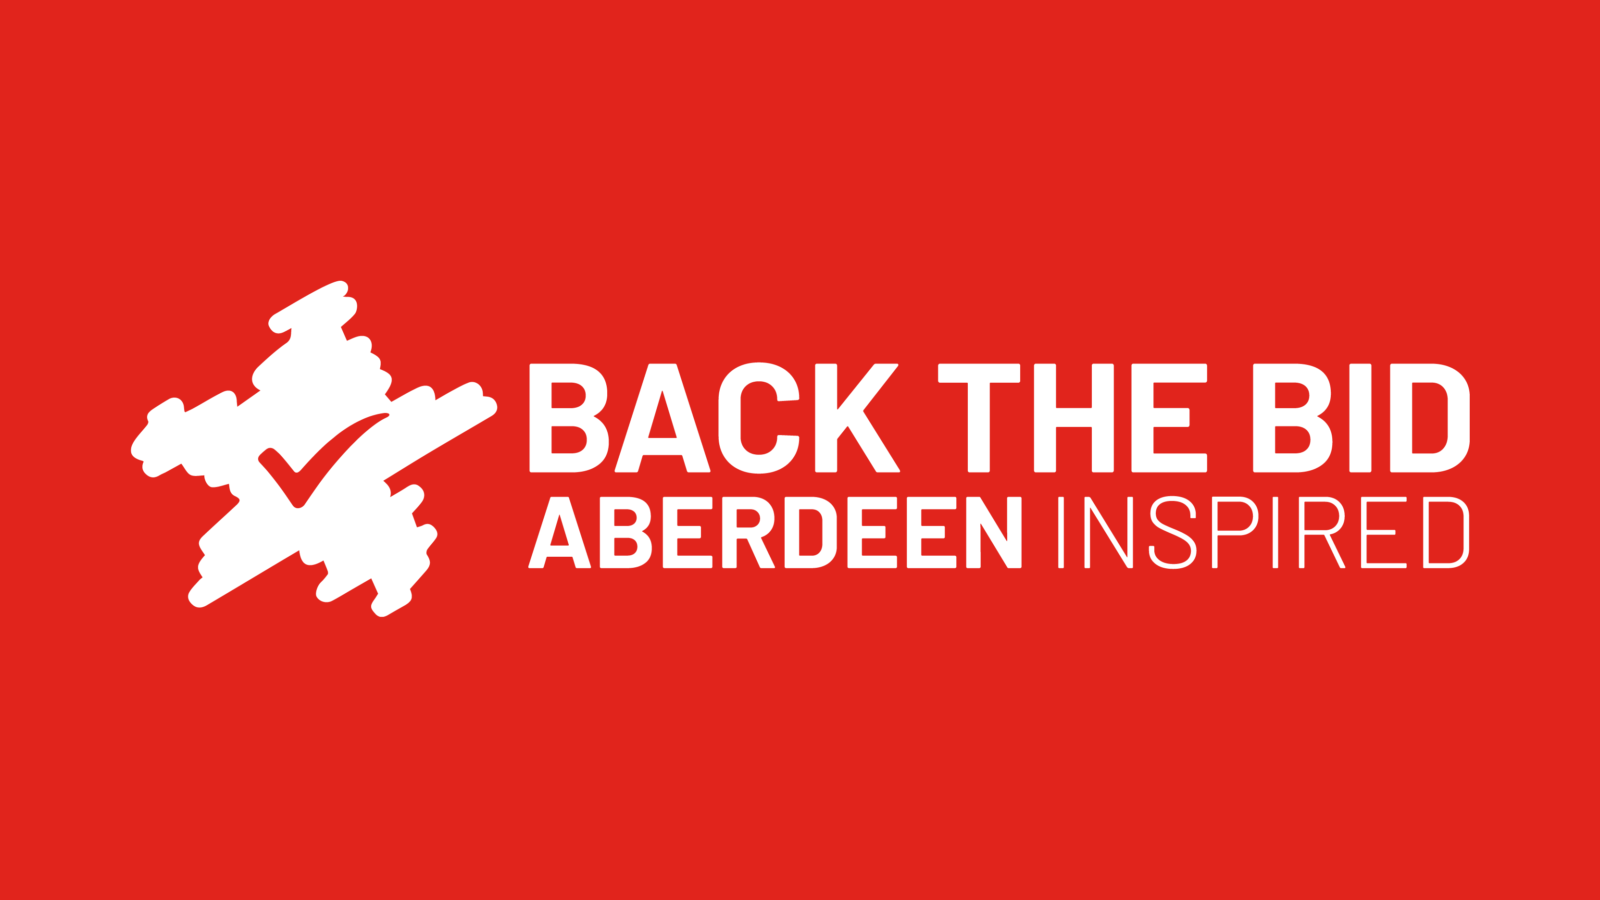 Importance of vibrant city centre highlighted by Aberdeen’s universities